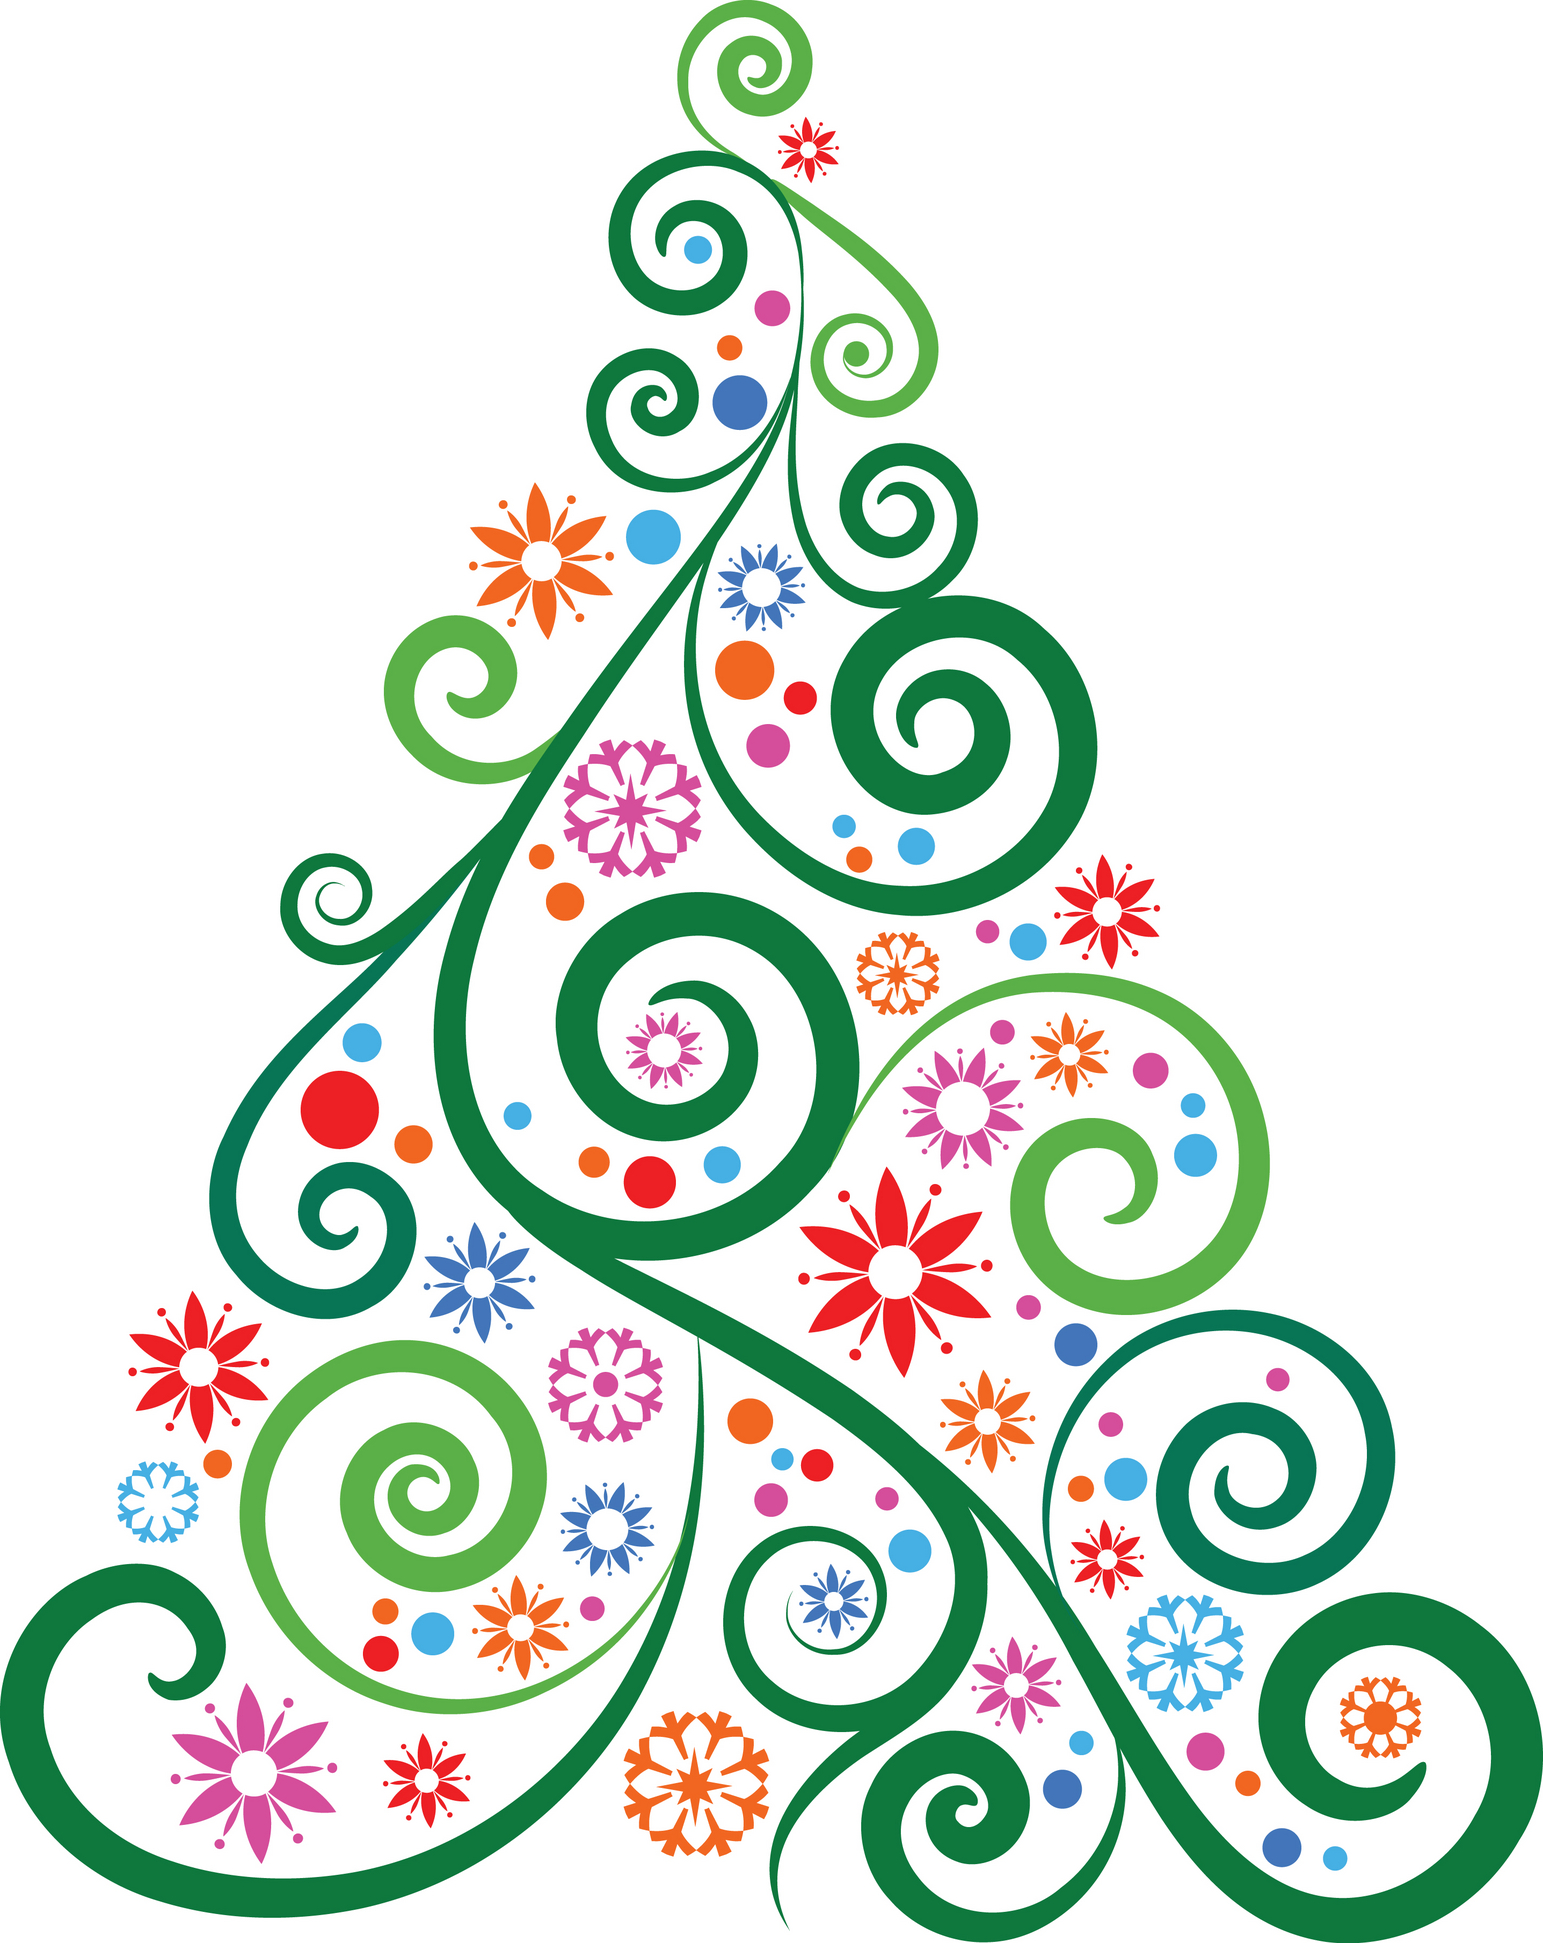 10 Christmas Tree Line Drawing Free Cliparts That You Can Download To